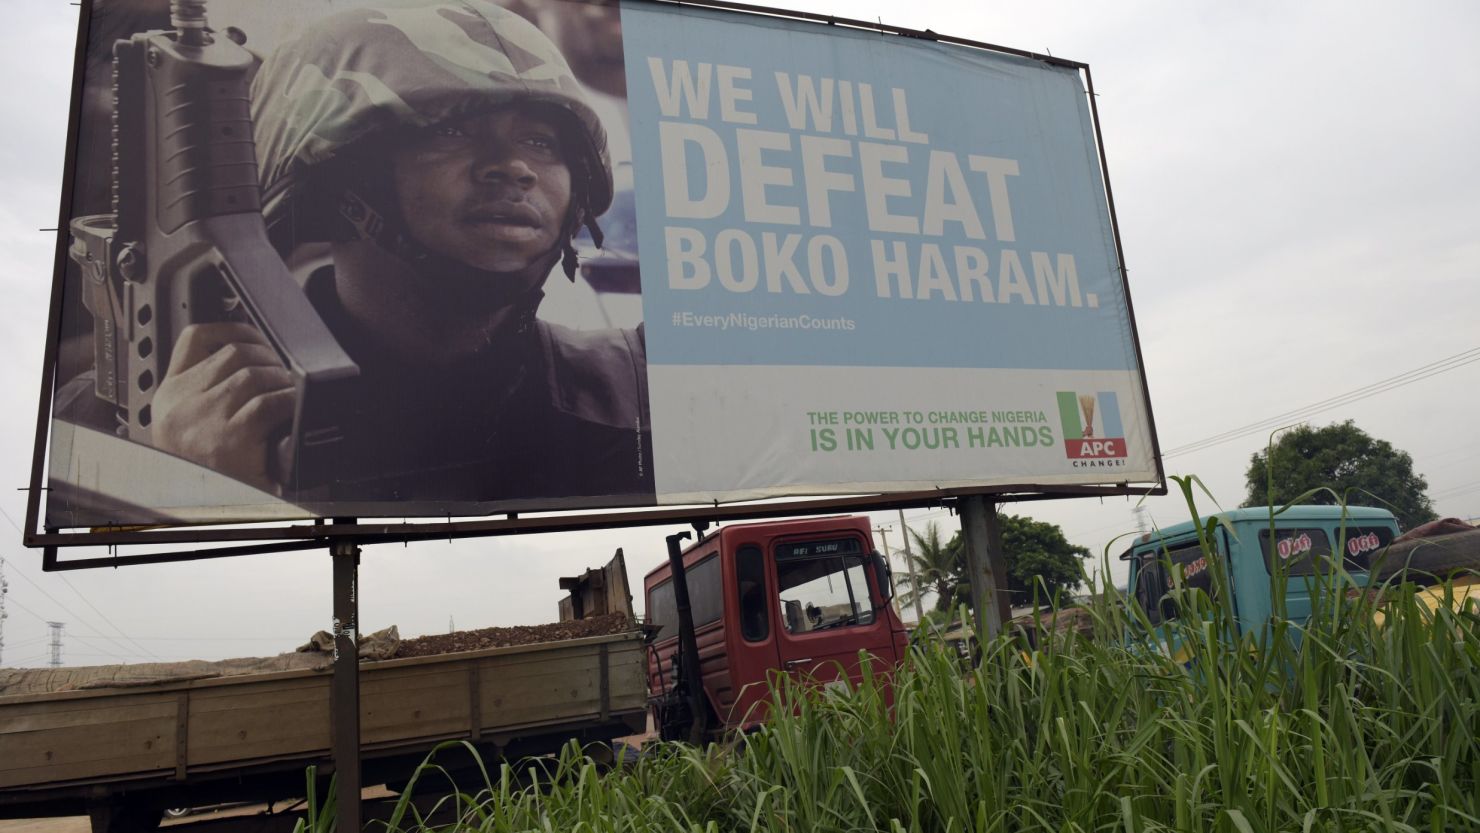 The ruling All Progressives Congress party is posting billboards in Nigeria, trumpeting its effort to defeat the Boko Haram Islamists.